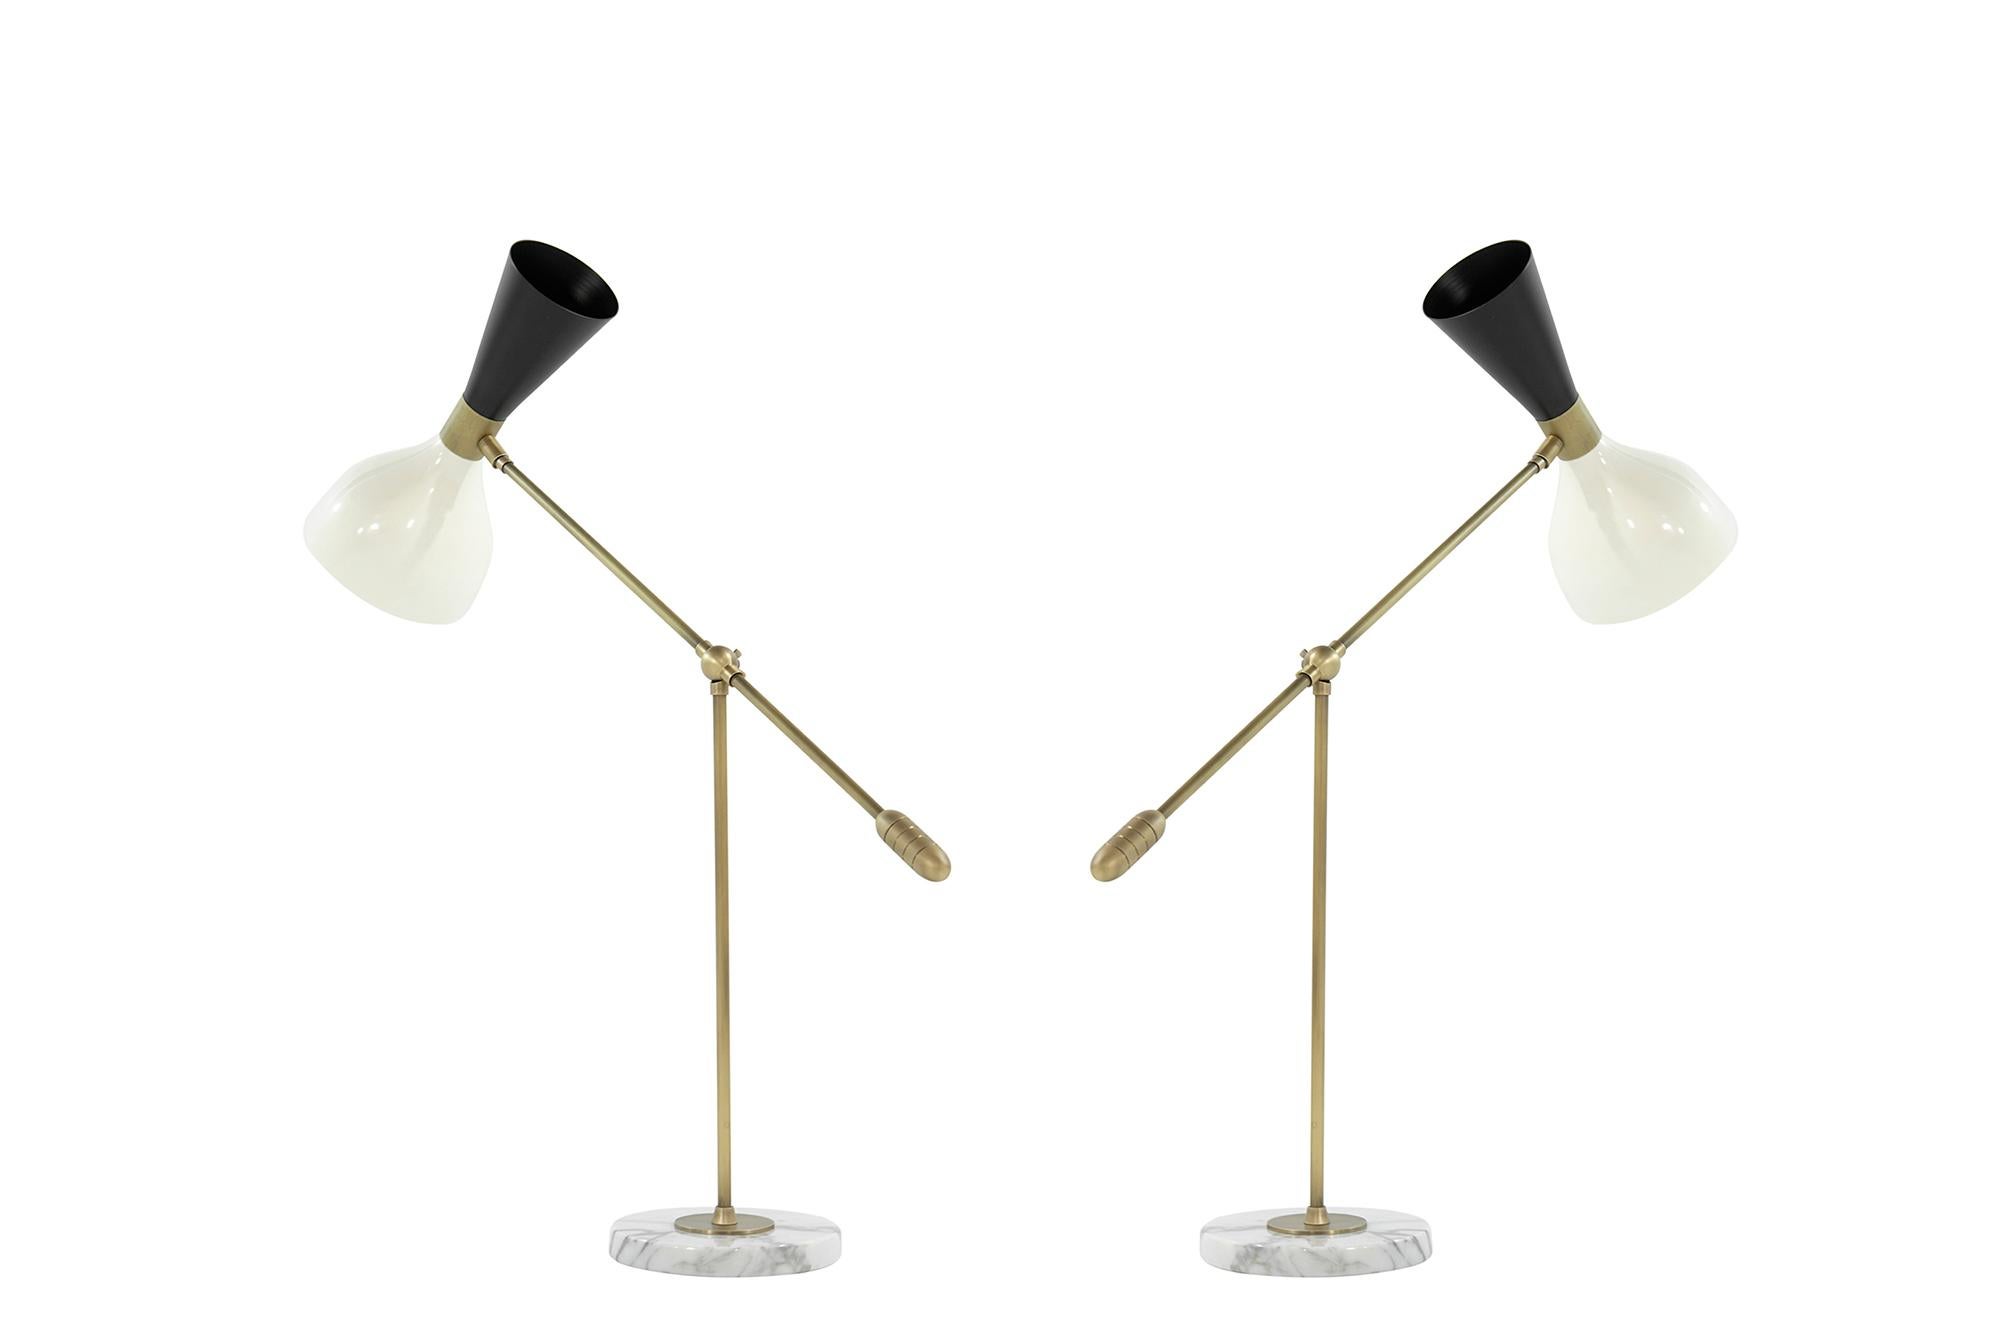 Our best-selling Ludo family of fixtures is now available as a desk or table lamp. Spun aluminum cones are a vintage 1950s Italian design. Swiveling head allows for cone adjustment and the locking joint allows for arm adjustment up and down. The